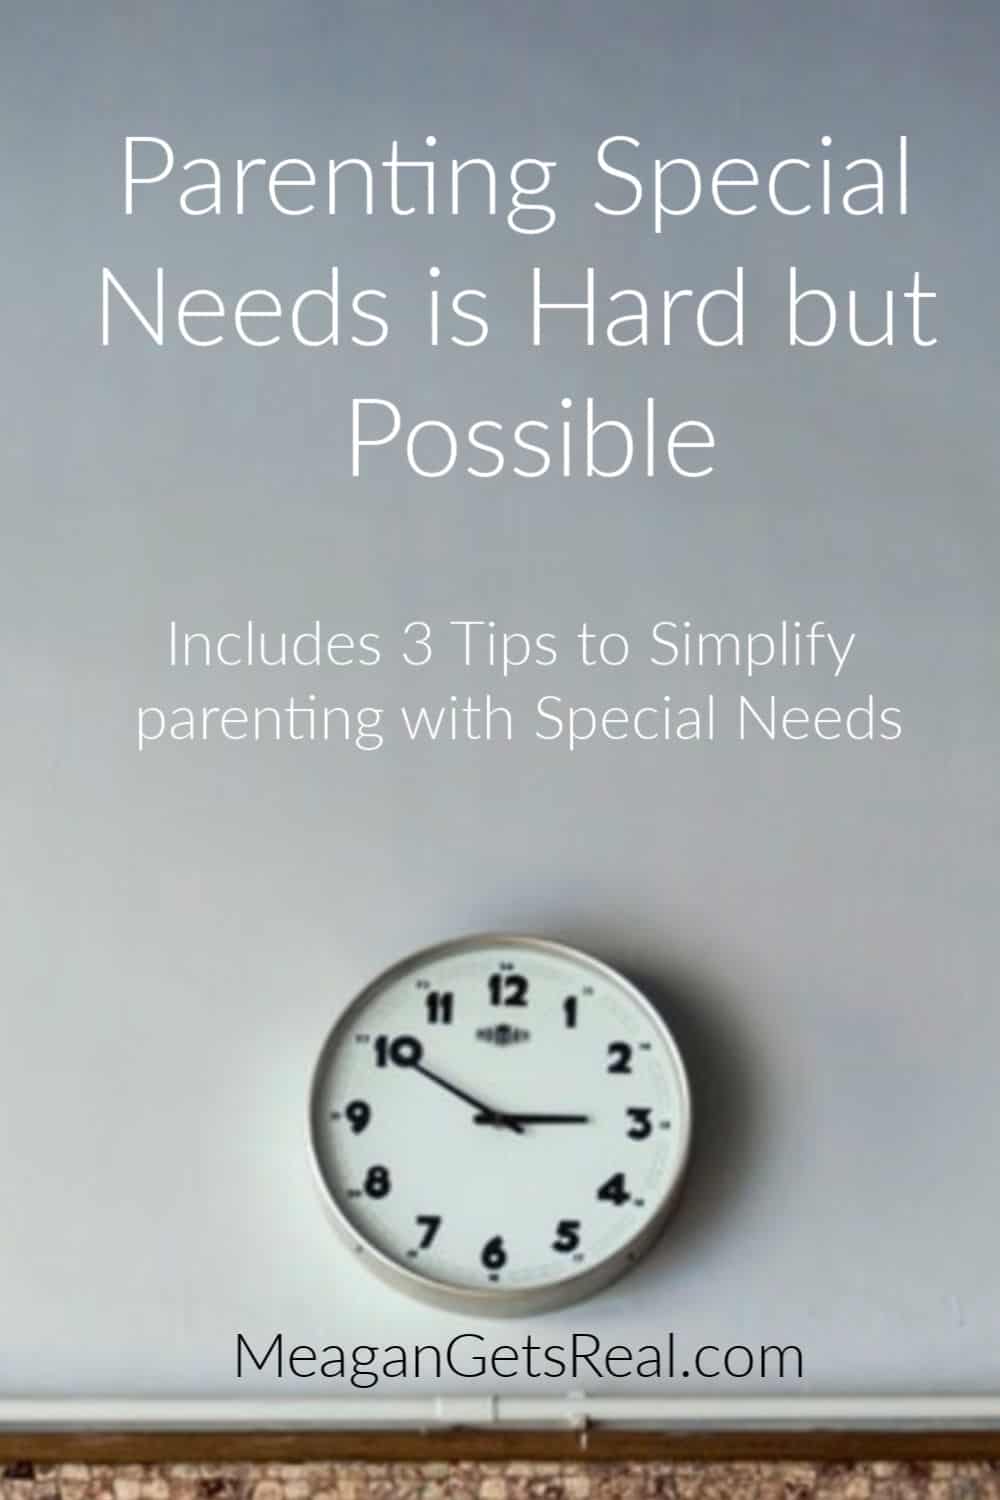 3 Things I've learned about parenting a child with special needs. Support for moms doesn't have to be hard to find with this comprehensive guide filled with parenting resources for moms you won't want to miss.